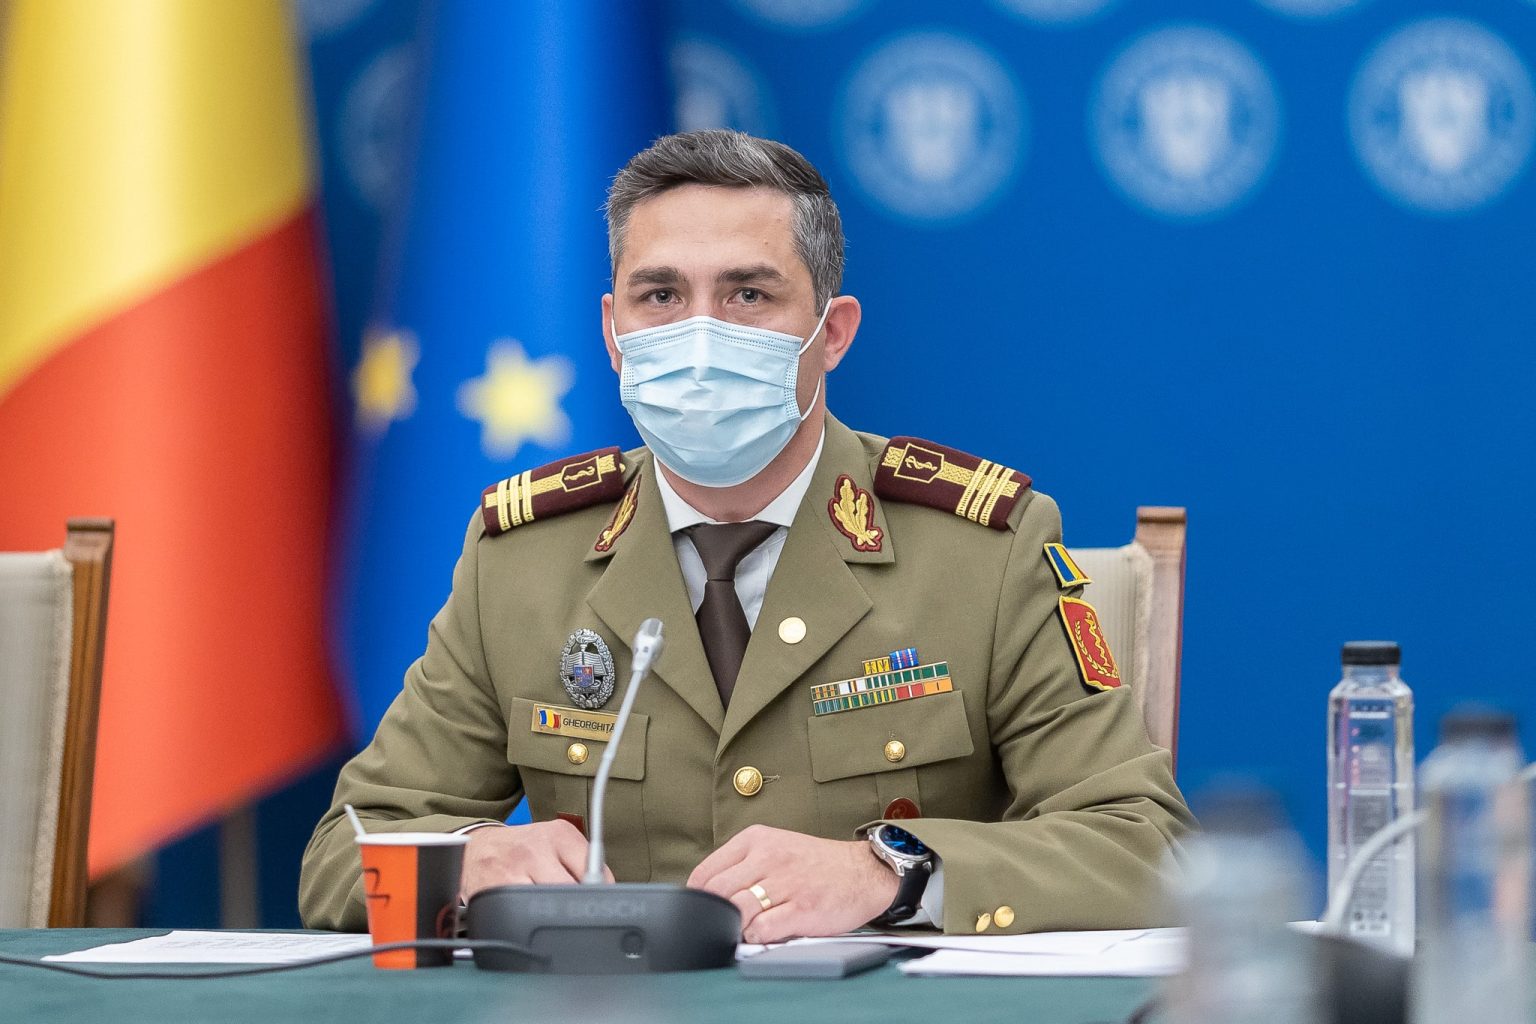 Press conference given by Valeriu Gheorghiță, President of the National Committee for Coordination of Activities on Vaccination against SARS-CoV-2 (CNCAV), and Andrei Baciu, Secretary of State in the Ministry of Health, Vice President of CNCAV